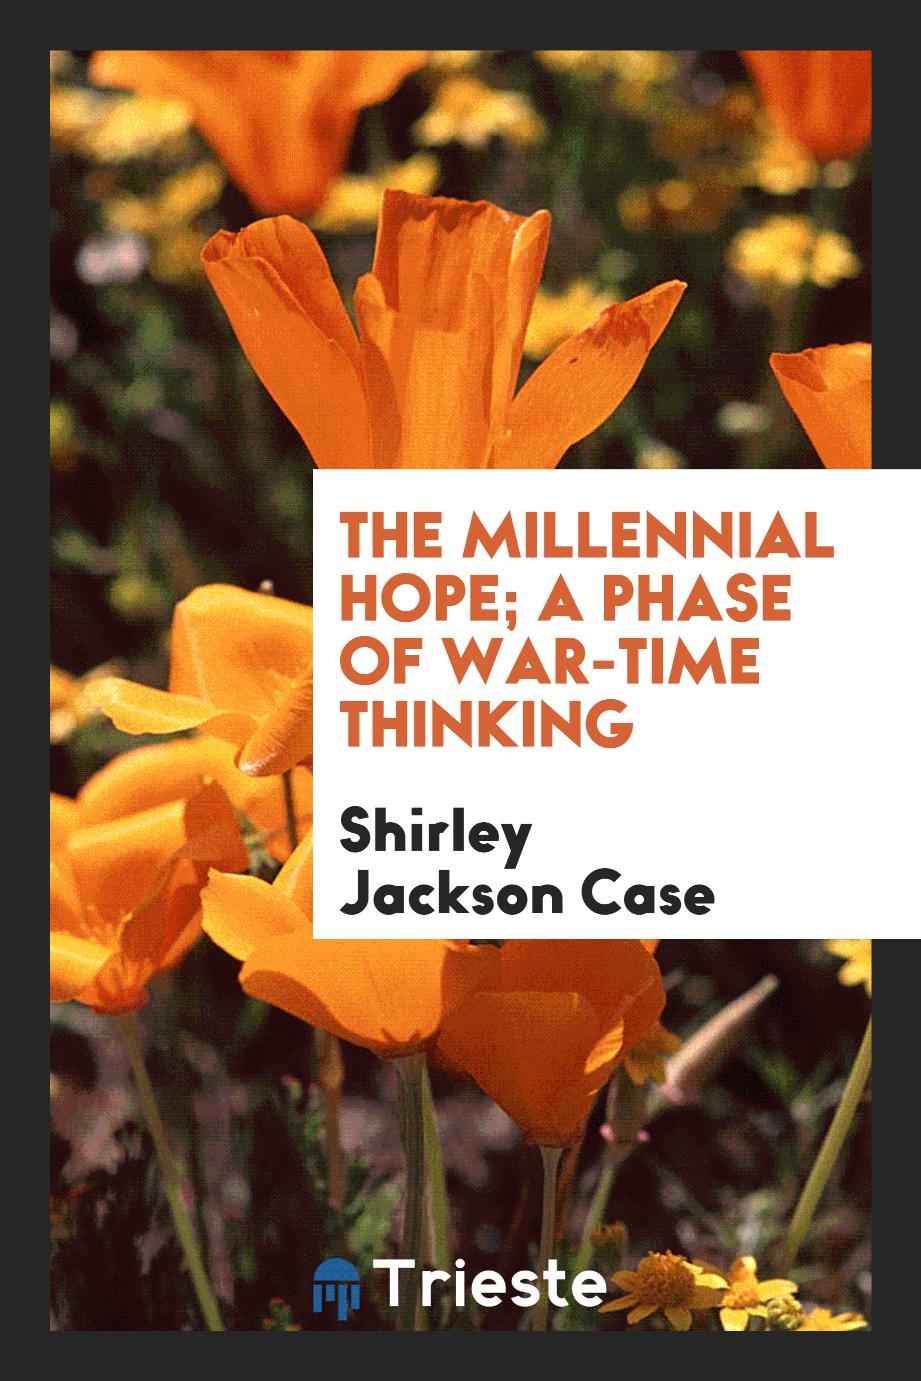 The millennial hope; a phase of war-time thinking